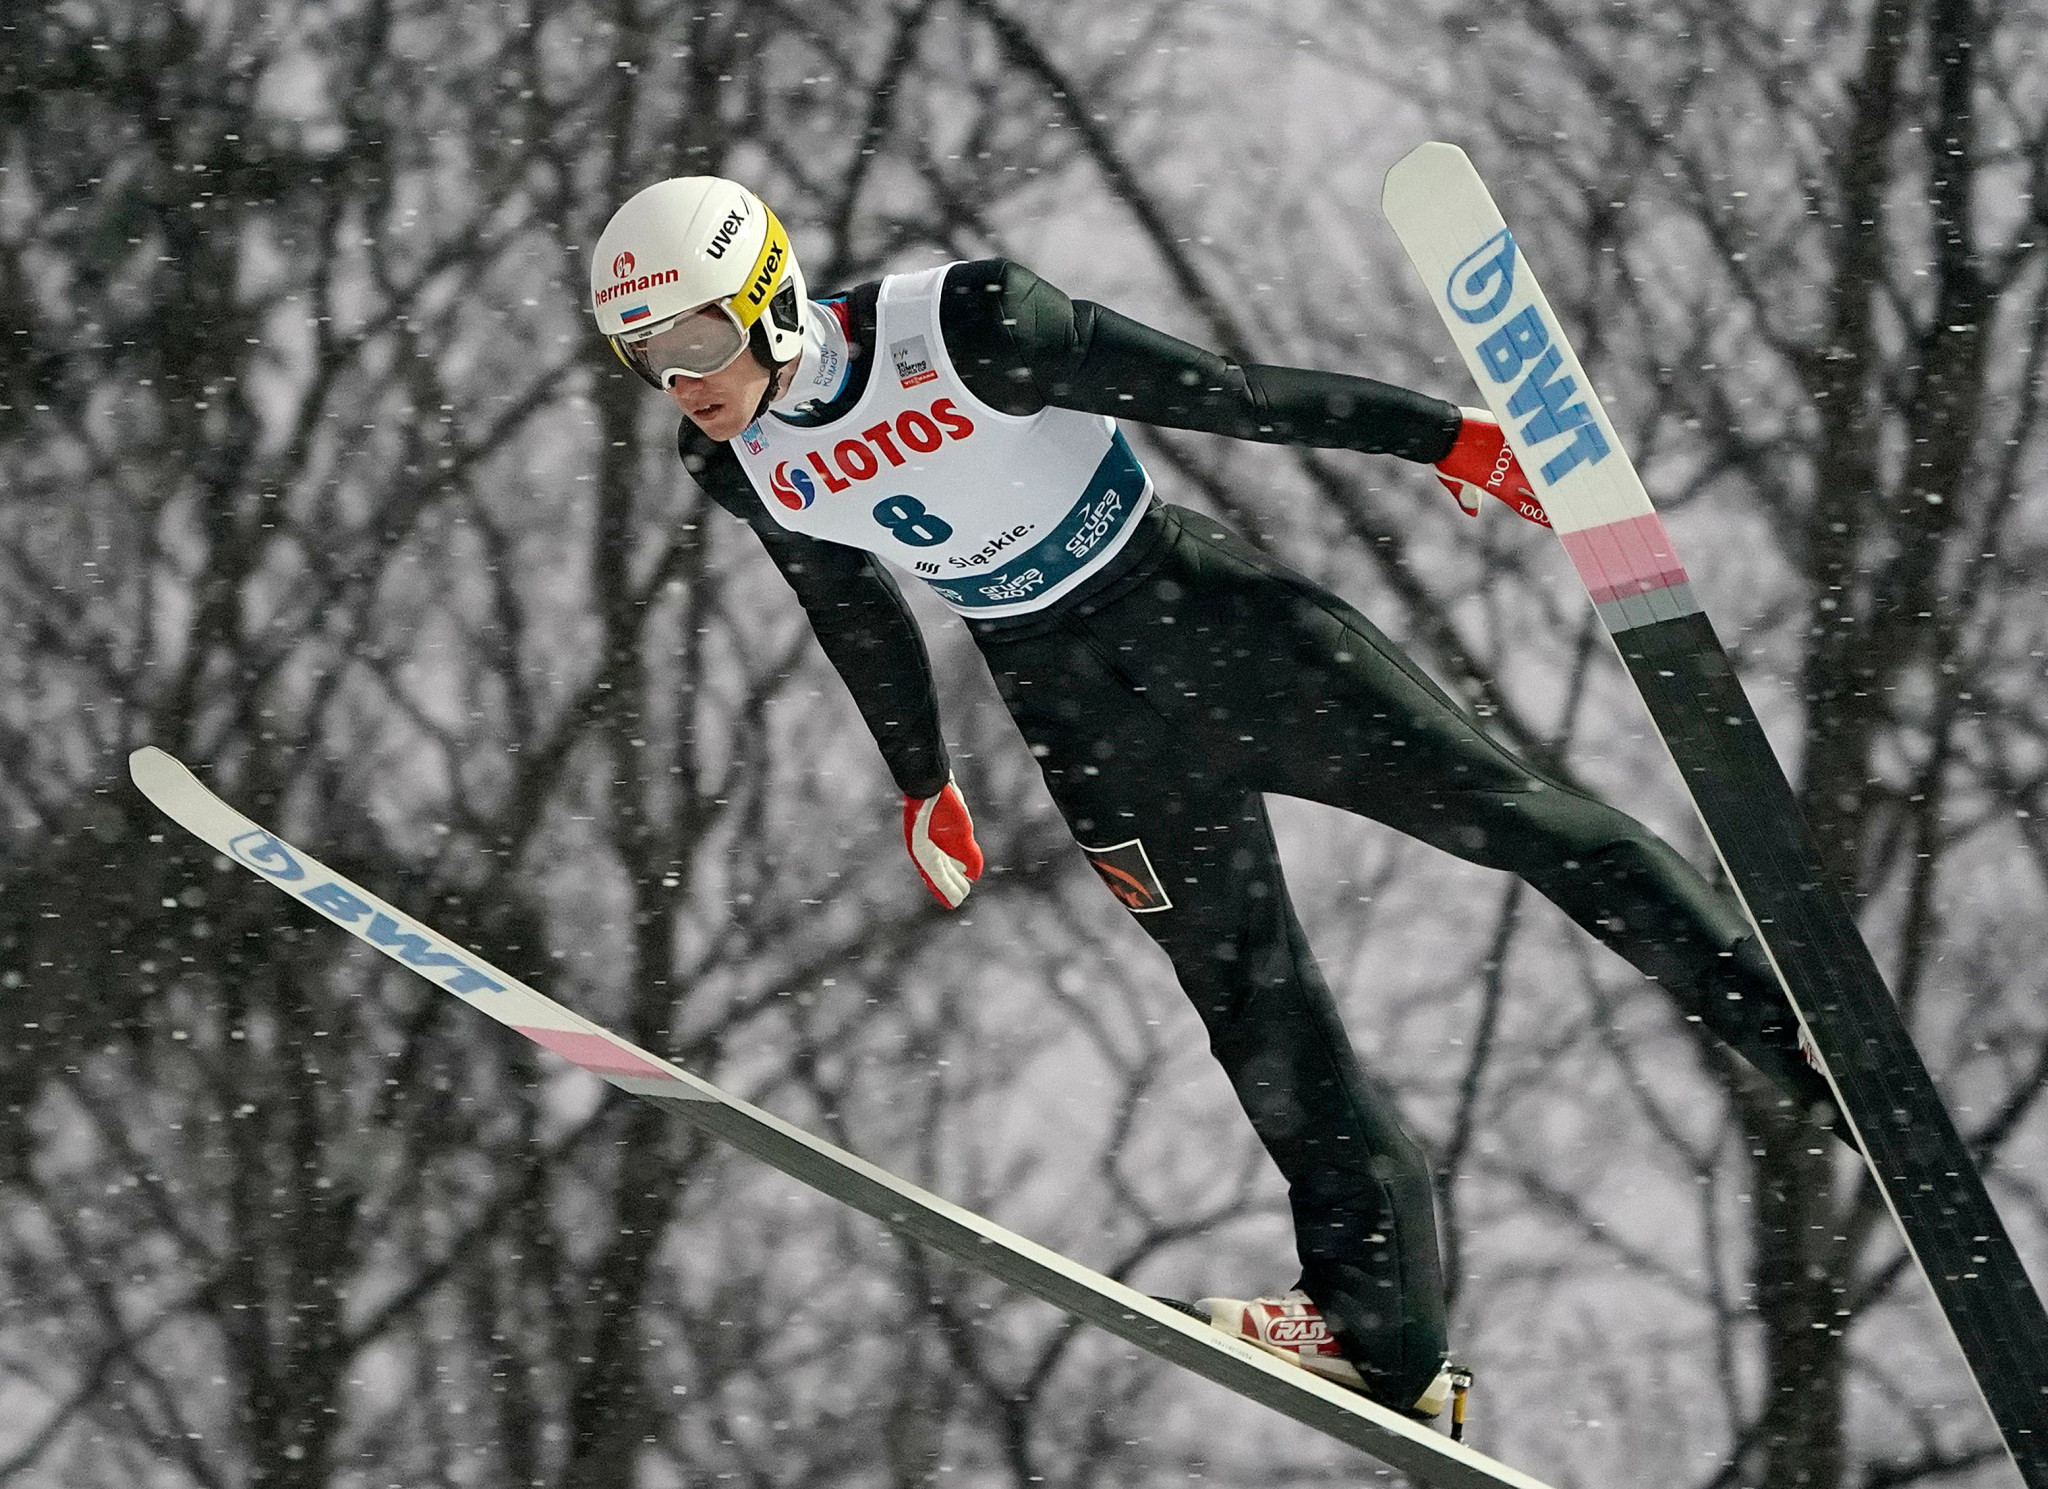 Japan's Ryōyū Kobayashi won his second Ski Jumping World Cup event in the space of a week in the Romanian resort of Râșnov today ©Getty Images